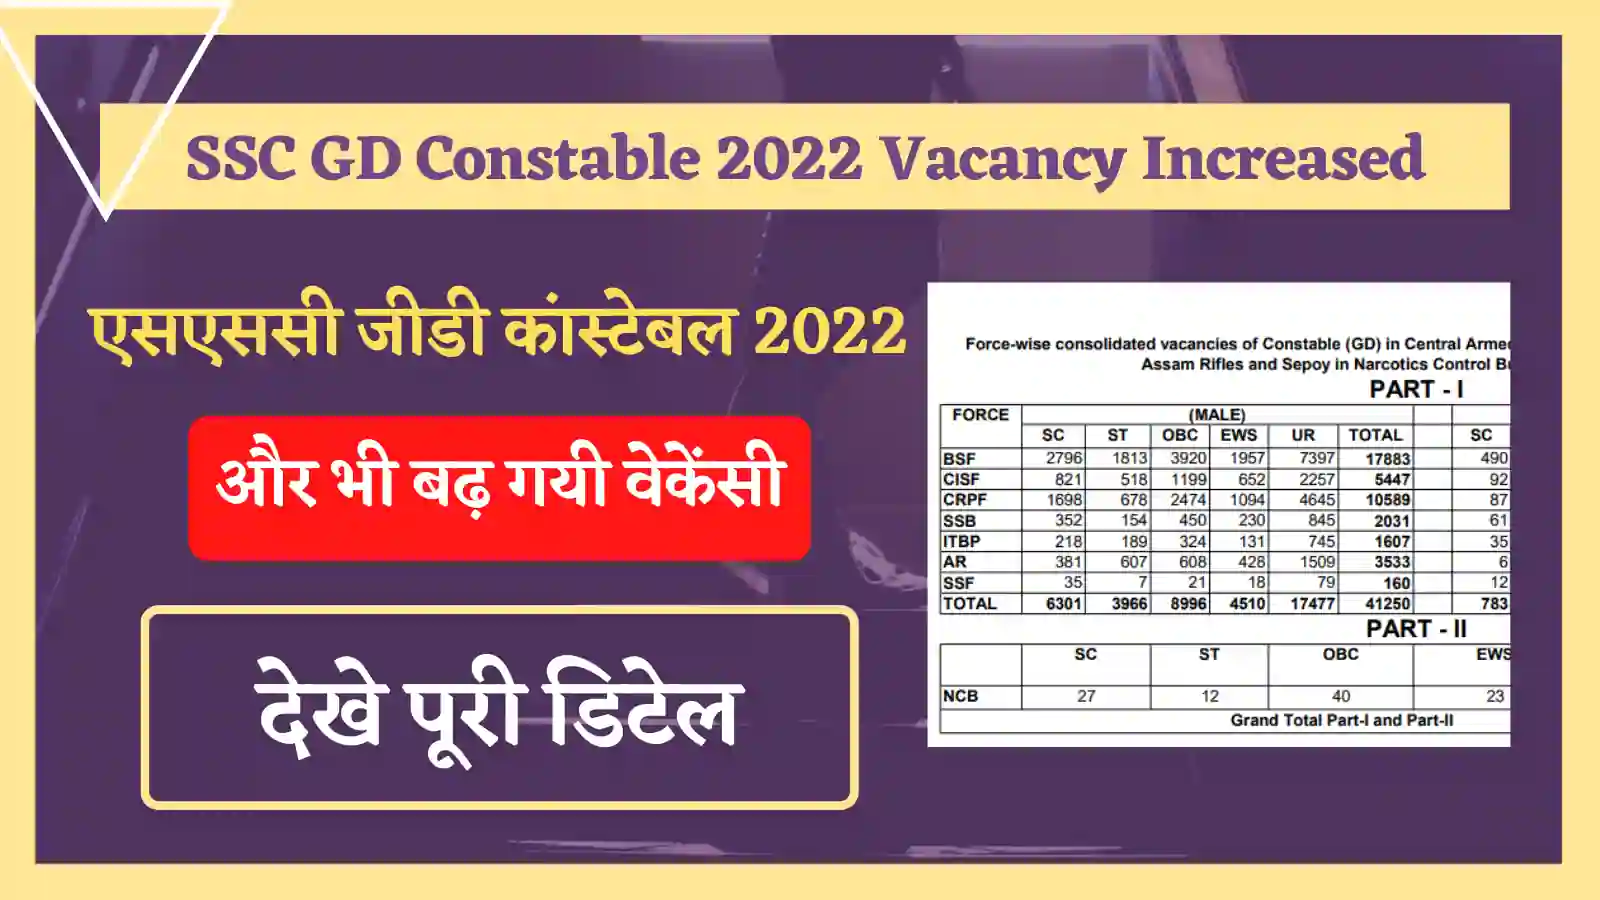 SSC GD Constable 2022 Vacancy Increased